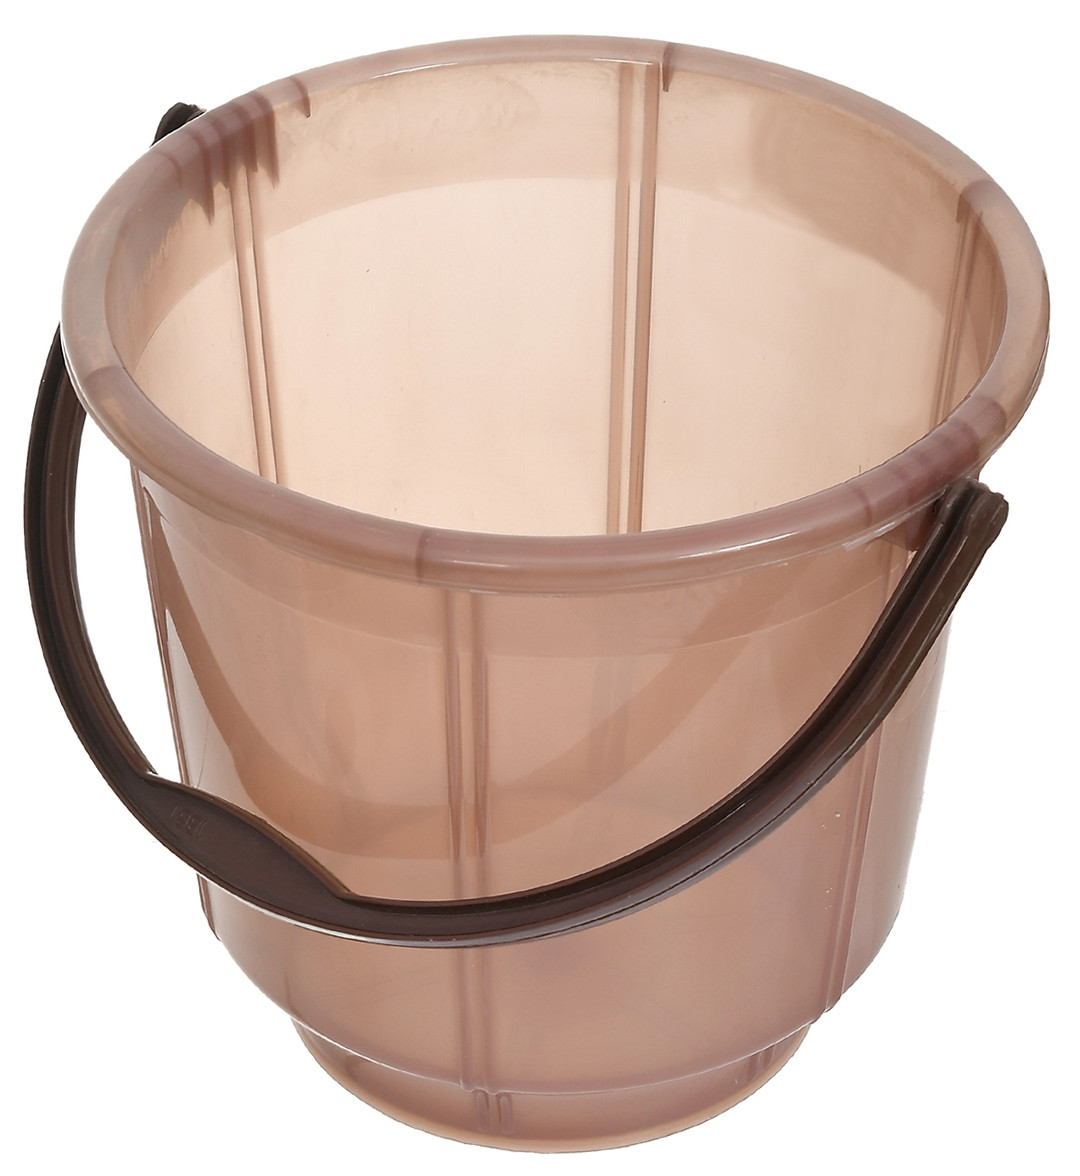 Kuber Industries Multipurposes Tranasparent Plastic Bucket For Bathing Home Cleaning & Storage Purpose, 13Ltr. (Brown)-47KM01217